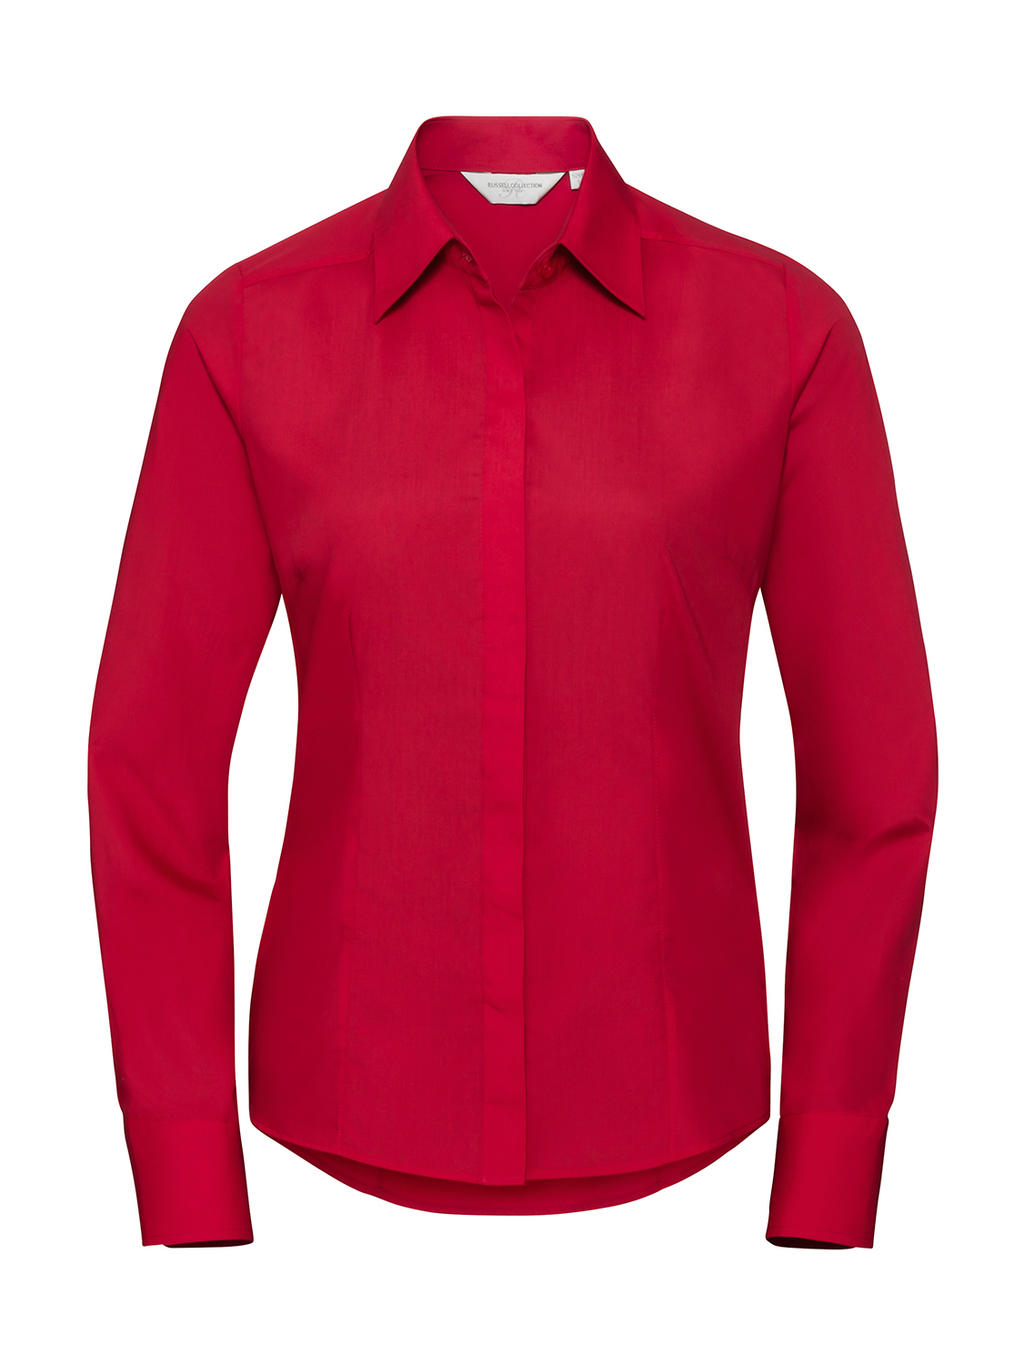  Ladies LS Fitted Poplin Shirt in Farbe Classic Red